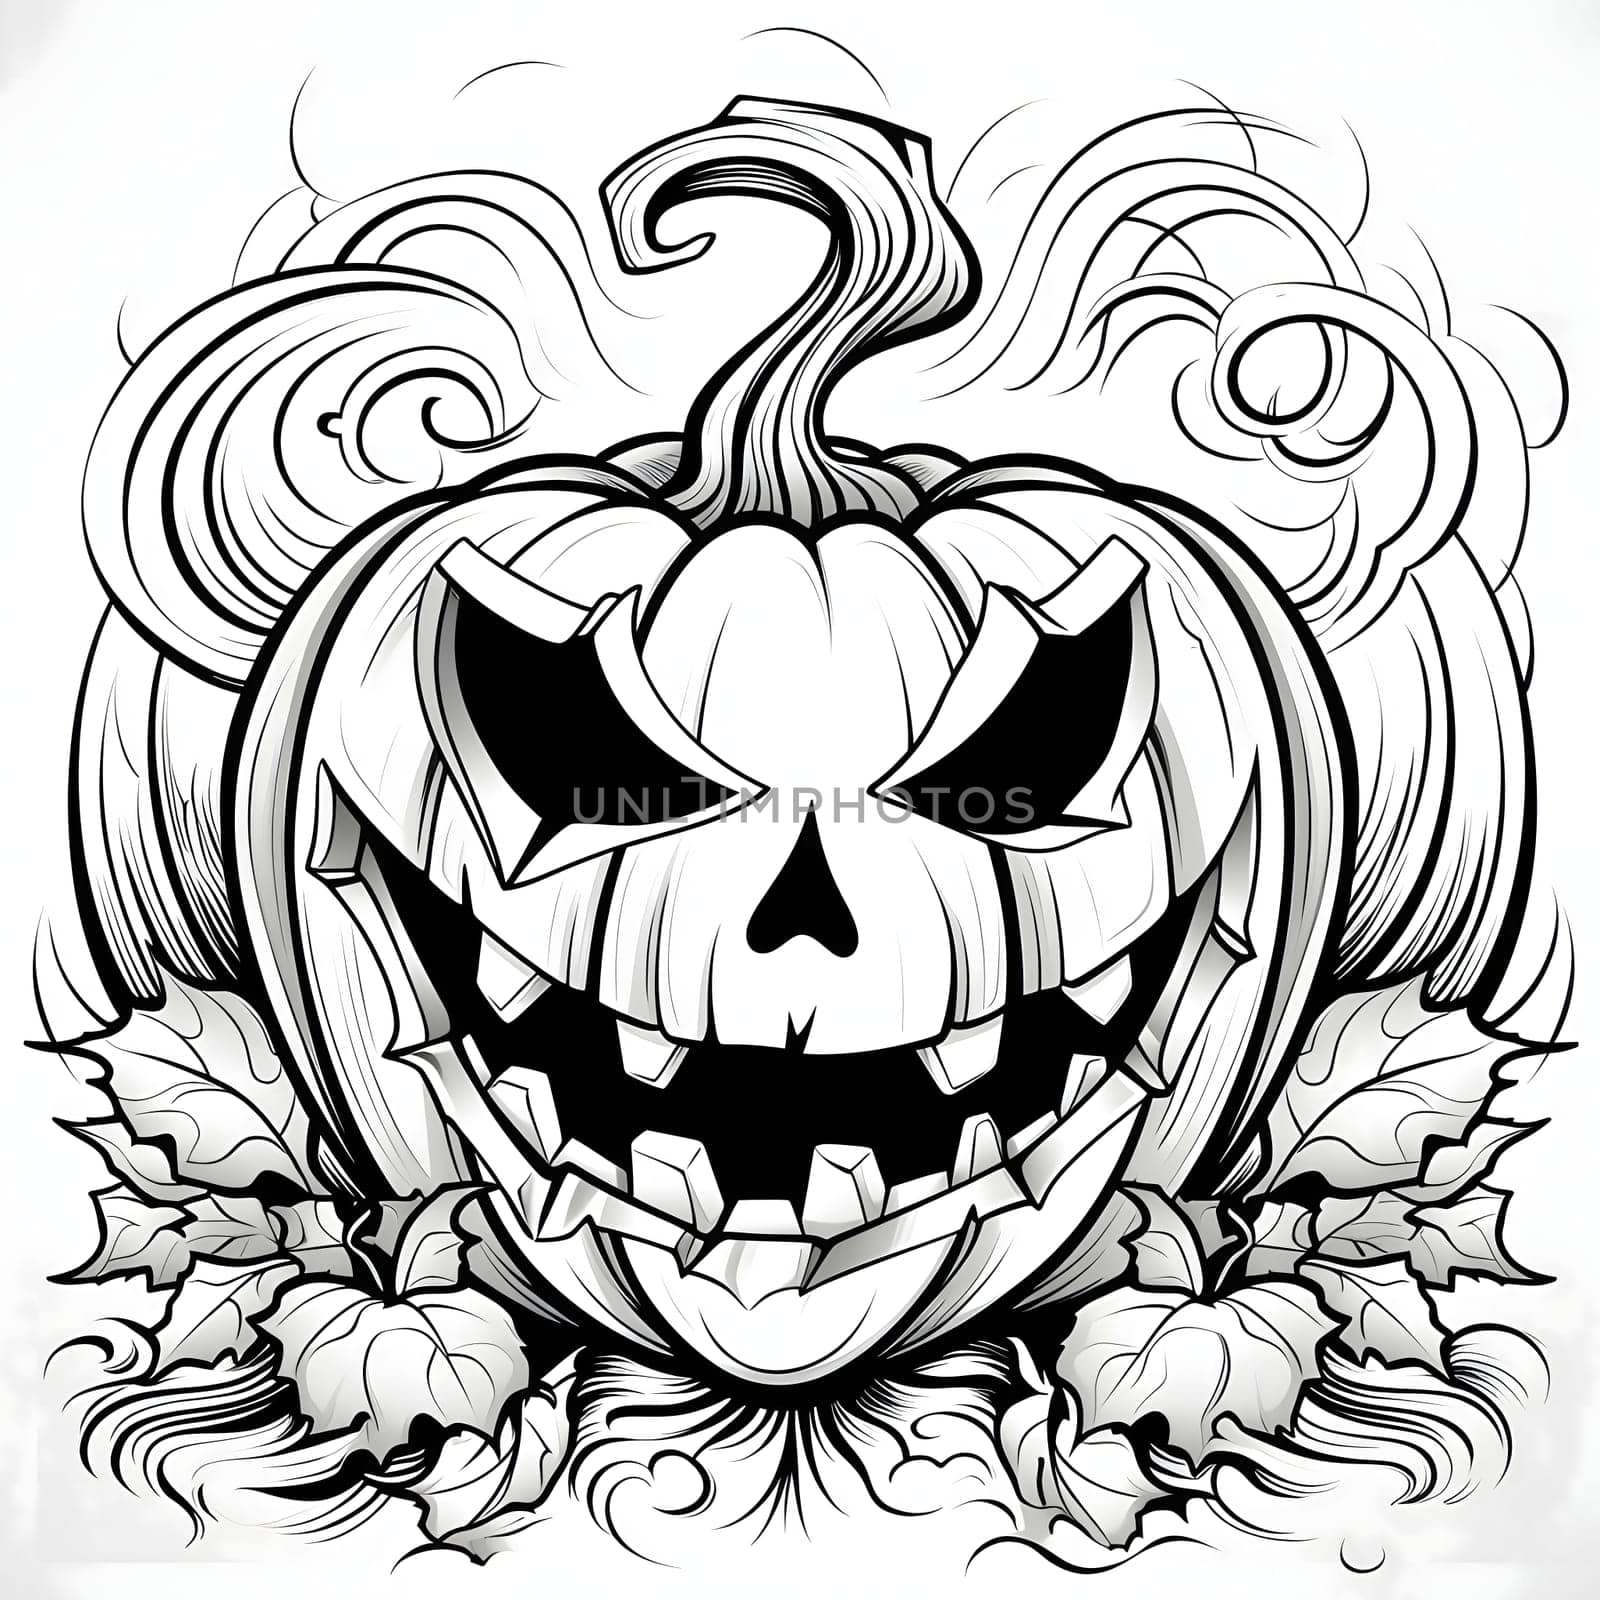 Dark jack-o-lantern pumpkin and surrounding vines and leaves, Halloween black and white picture coloring book. Atmosphere of darkness and fear.